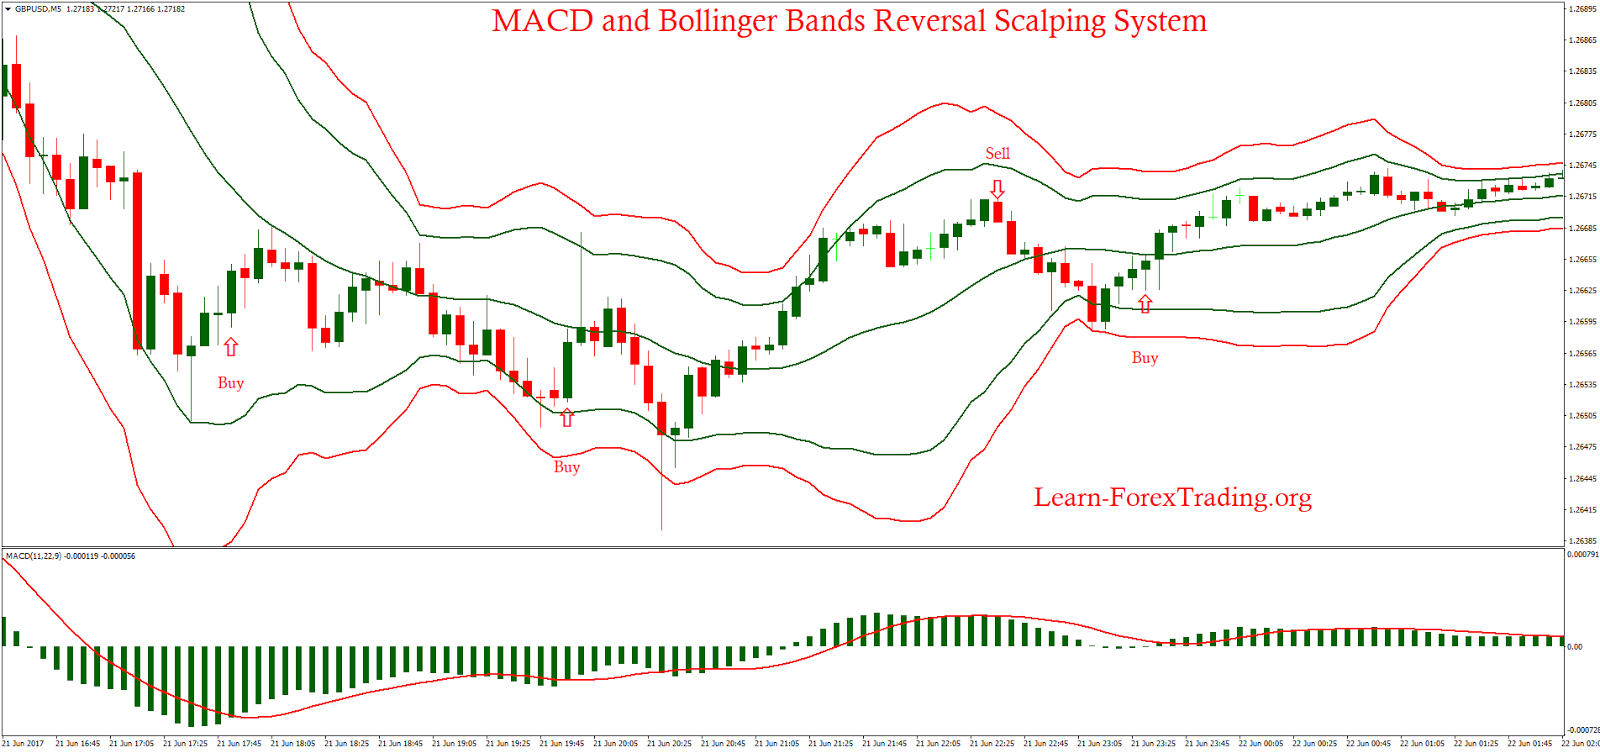 Bollinger bands macd strategy